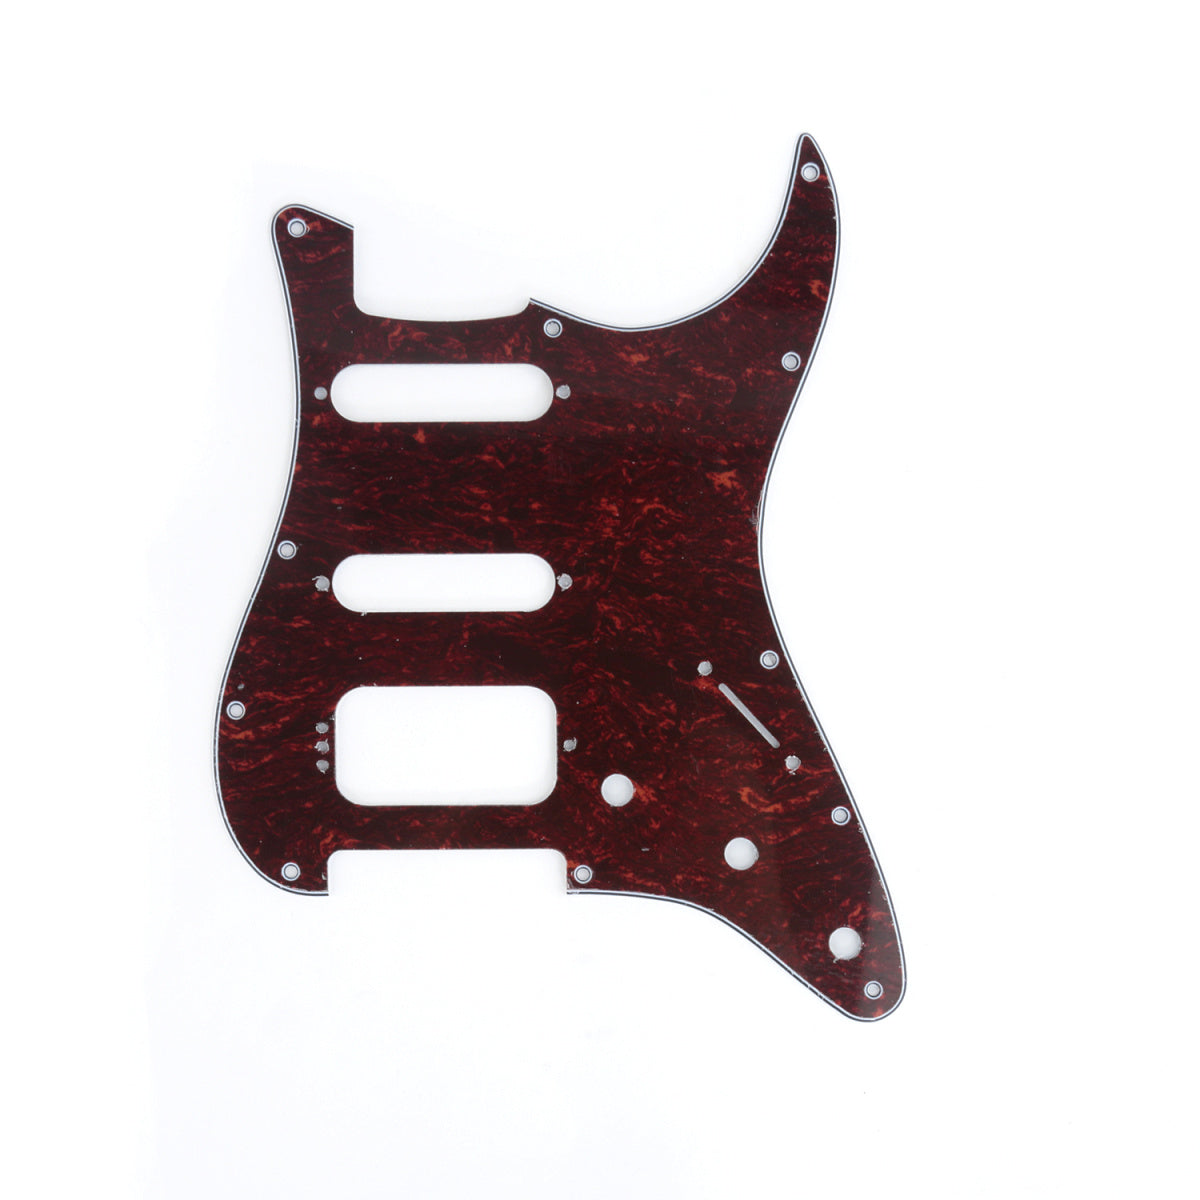 Musiclily Pro 11-Hole Round Corner HSS Guitar Strat Pickguard for USA/Mexican Stratocaster 4-screw Humbucking Mounting Open Pickup, 4Ply Red Tortoise